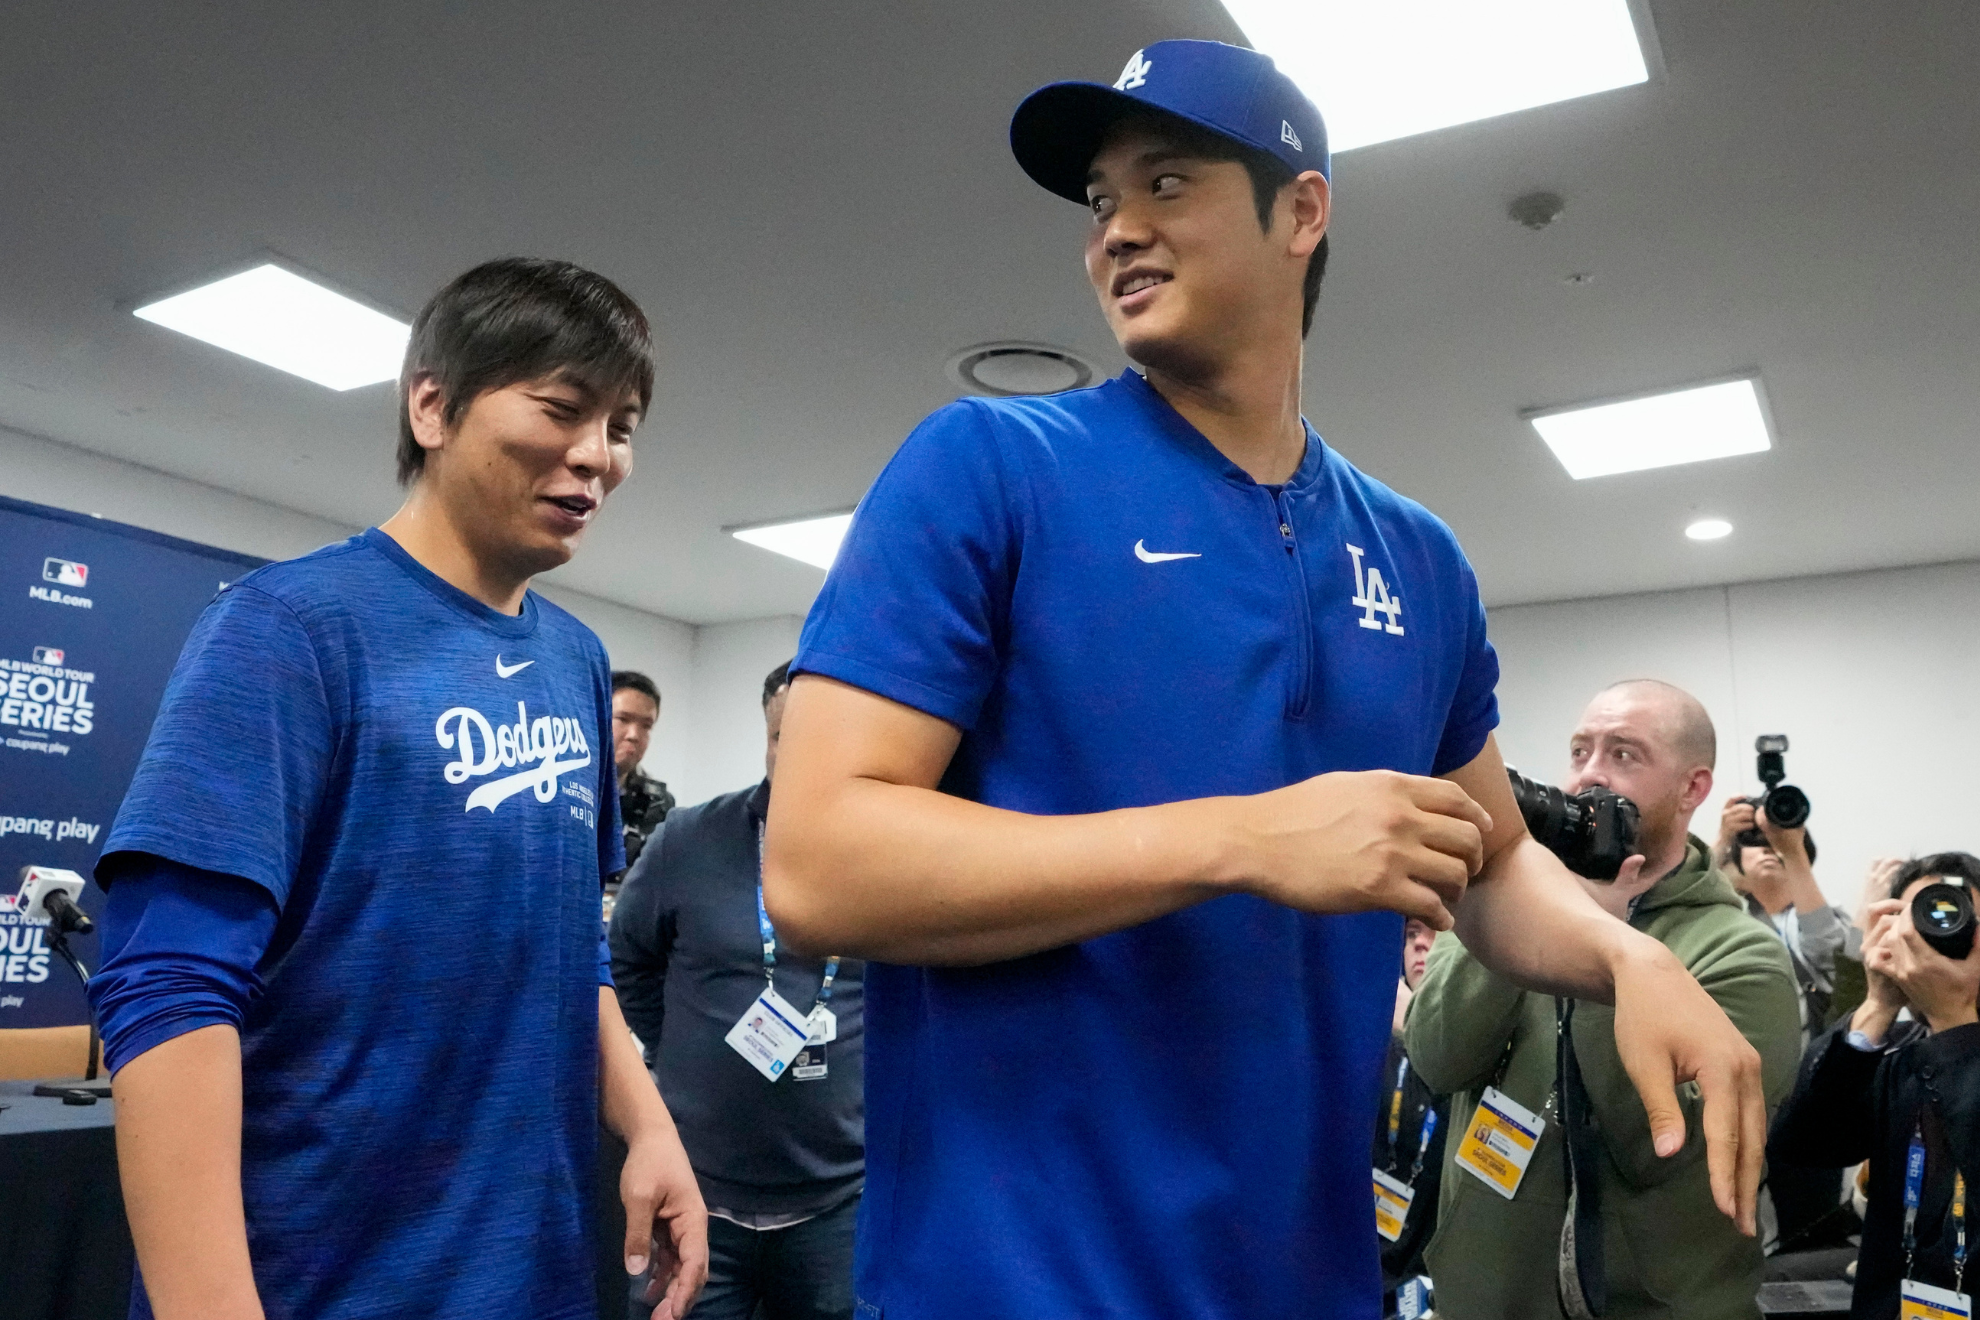 Ippei Mizuhara and Shohei Ohtani while with the Los Angeles Dodgers.